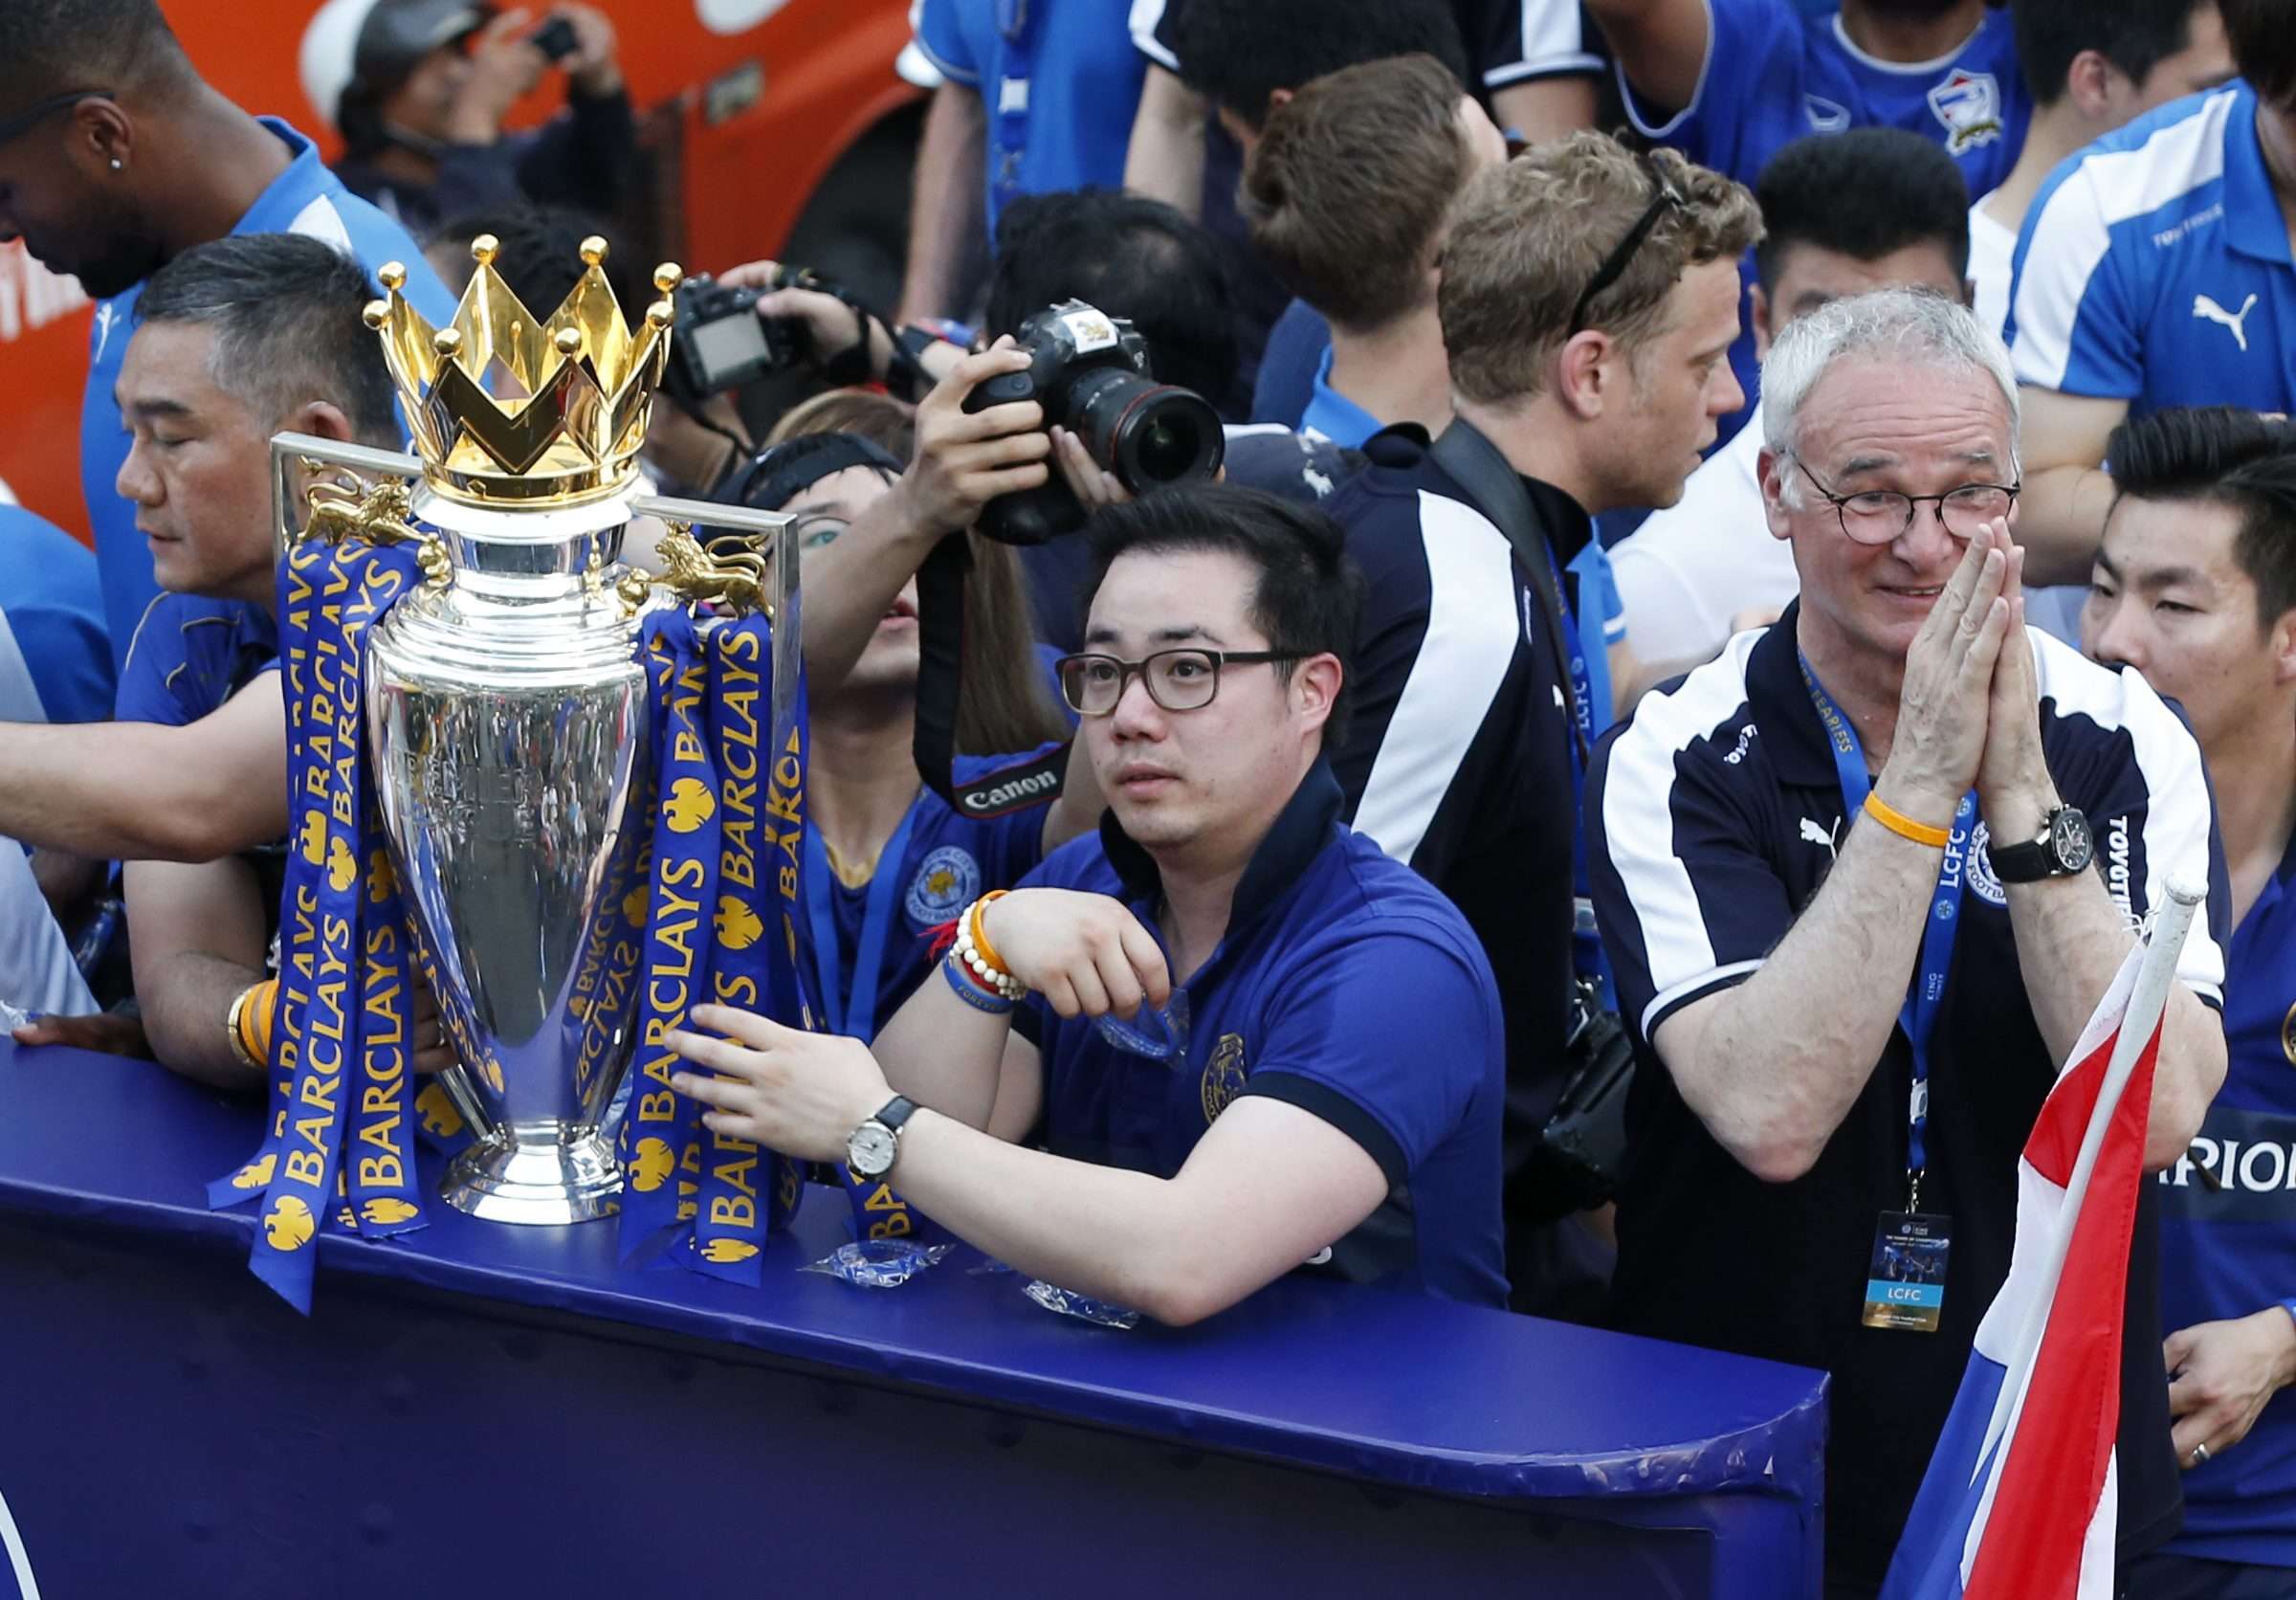 Leicester City chairman Vichai Srivaddhanaprabha (left) and vice chairman Aiyawatt Srivaddhanaprabha parade the Premier League title with manager Claudio Ranieri in a rare example of a successful Asian ownership model in the EPL. Photo: EPA